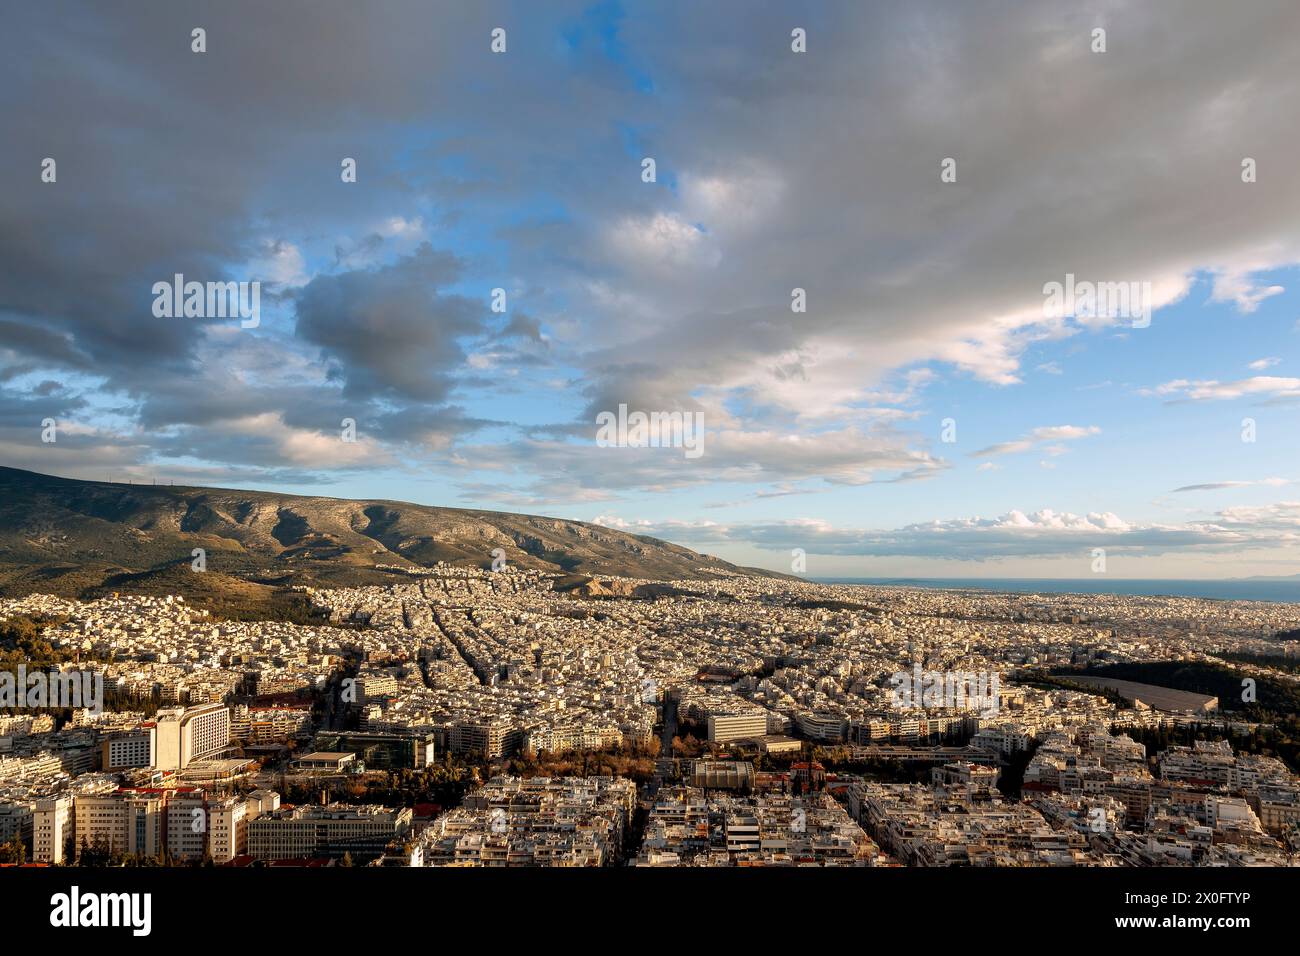 Majestic sunset with marvellous clouds over Hymettus mount and Athens city, Greece. There are several districts included like Ilioupoli, Pagkrati, Ili Stock Photo